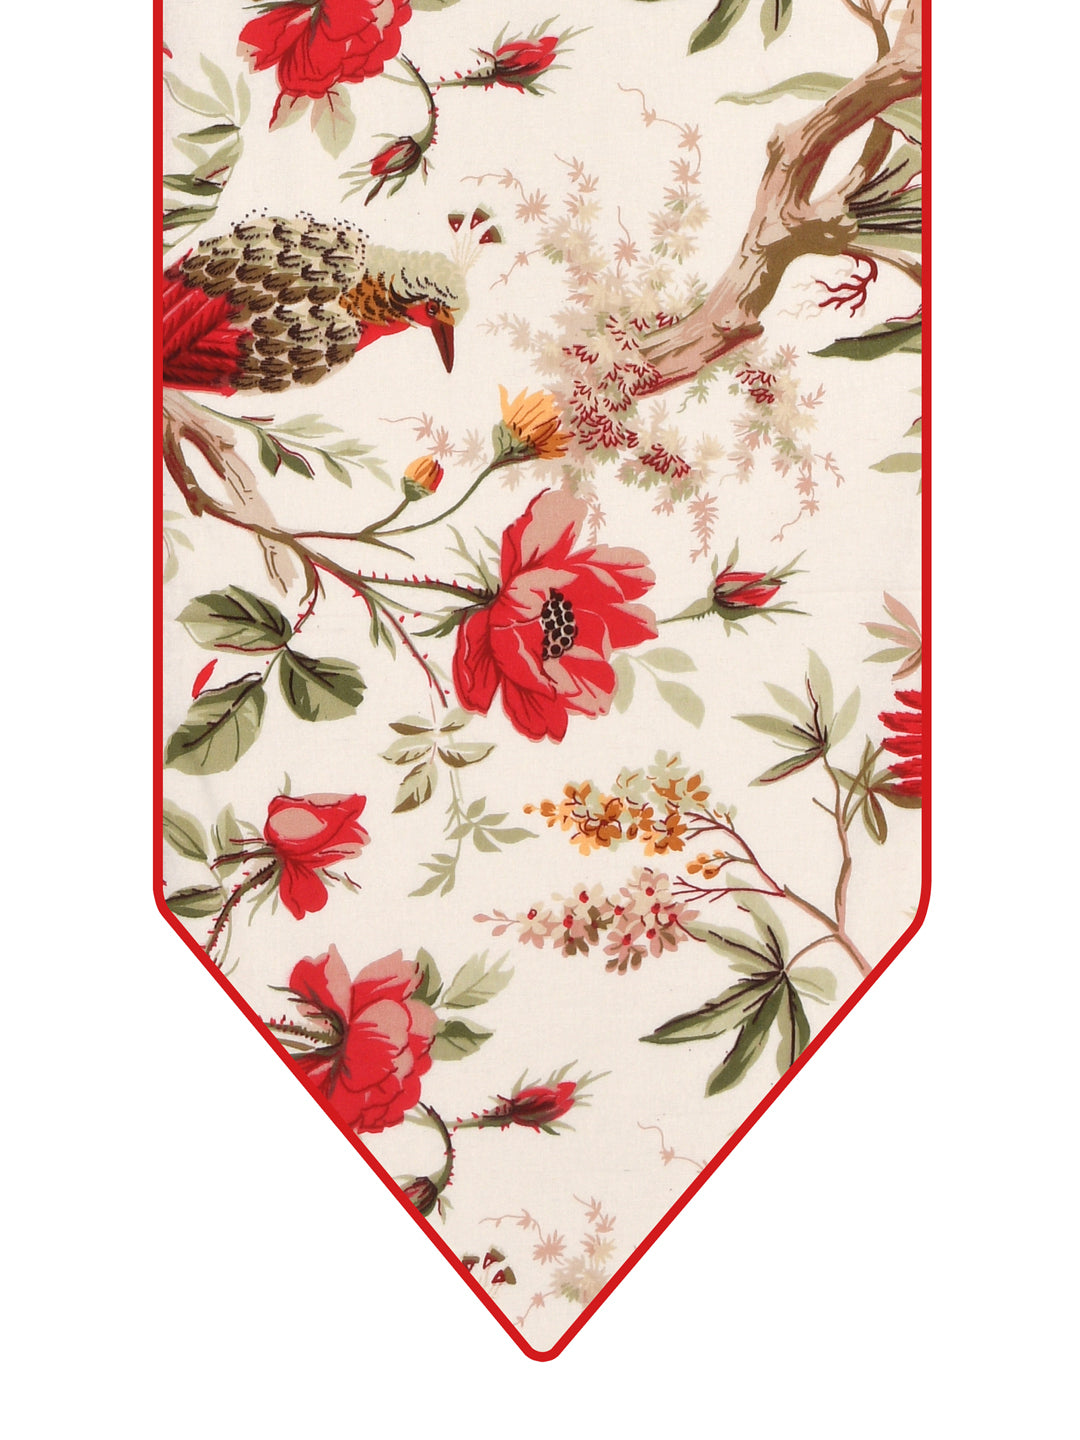 Table Runner; 14x72 Inches; Red Flowers & Birds